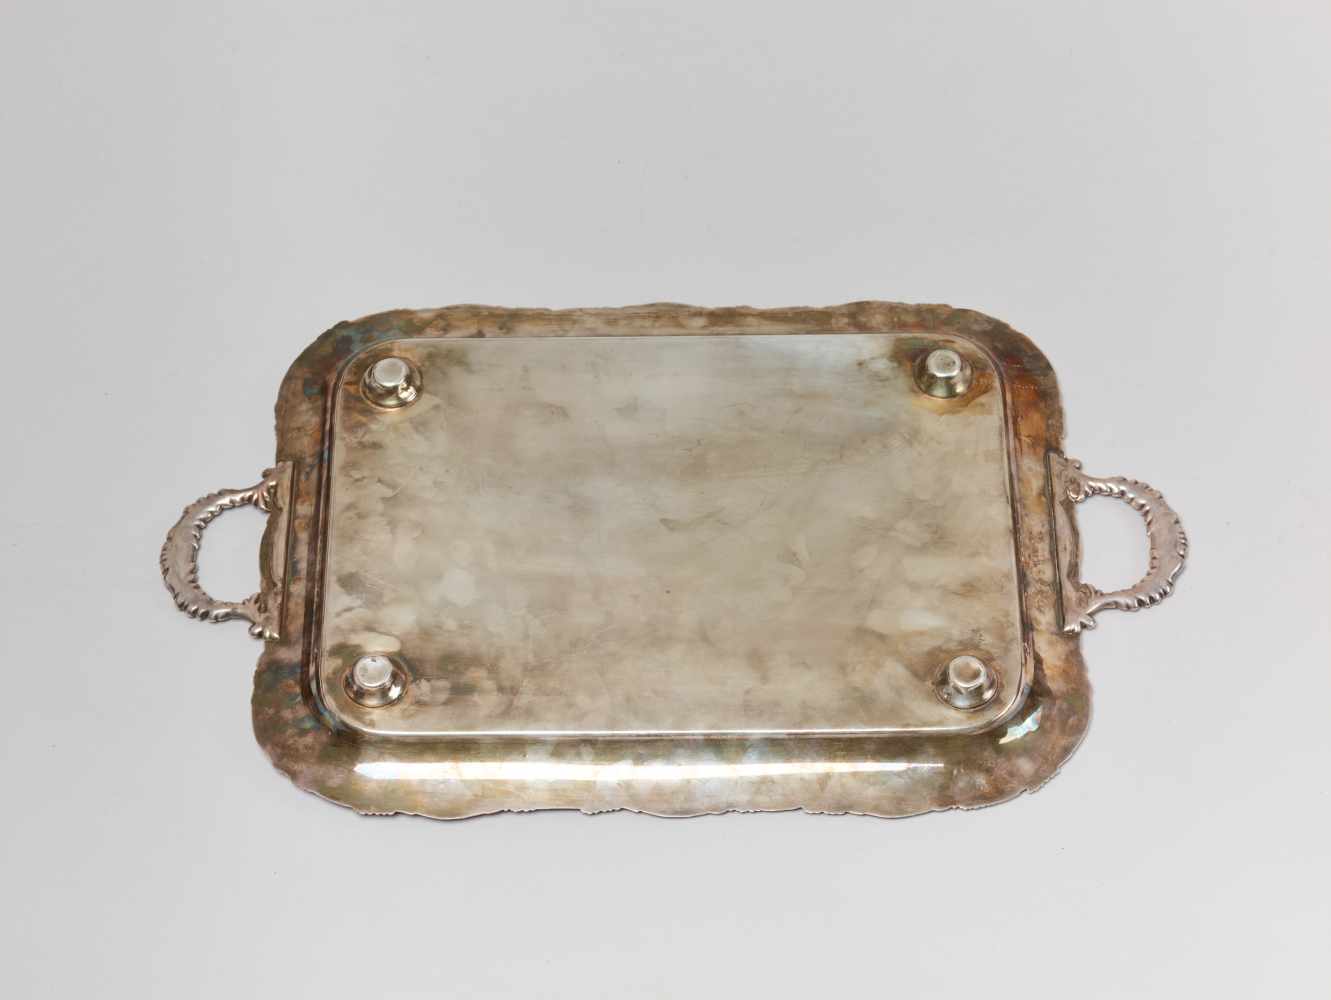 LARGE SILVER PLATE SERVING TRAY WITH WINE GRAPES DECORATION, 1900sSilver plate - Image 6 of 8